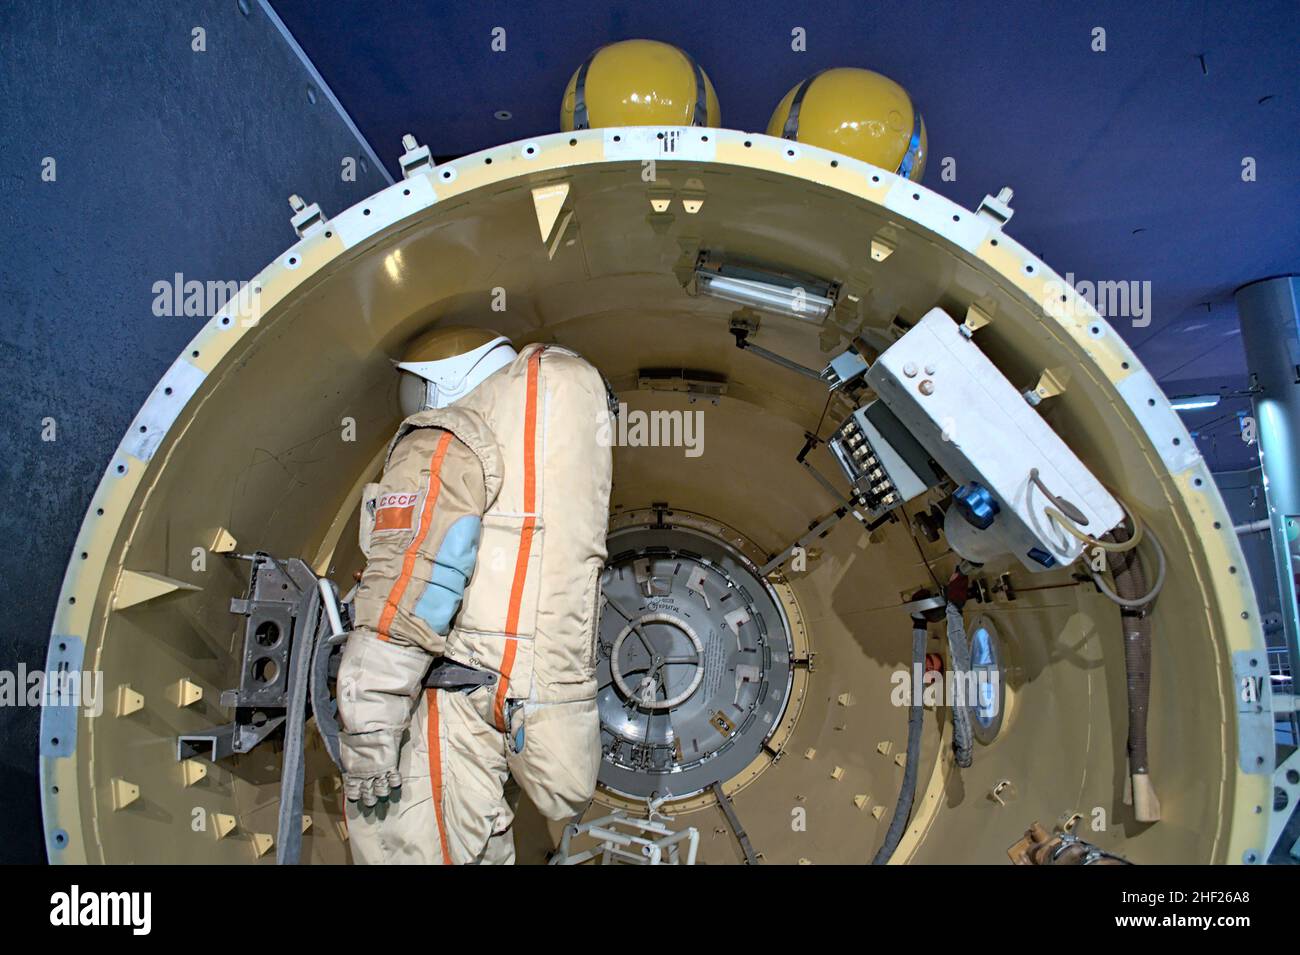 Airlock compartment of the Mir orbital station for the cosmonaut, to enter open space without depressurizing other compartments. Museum of Cosmonautic Stock Photo